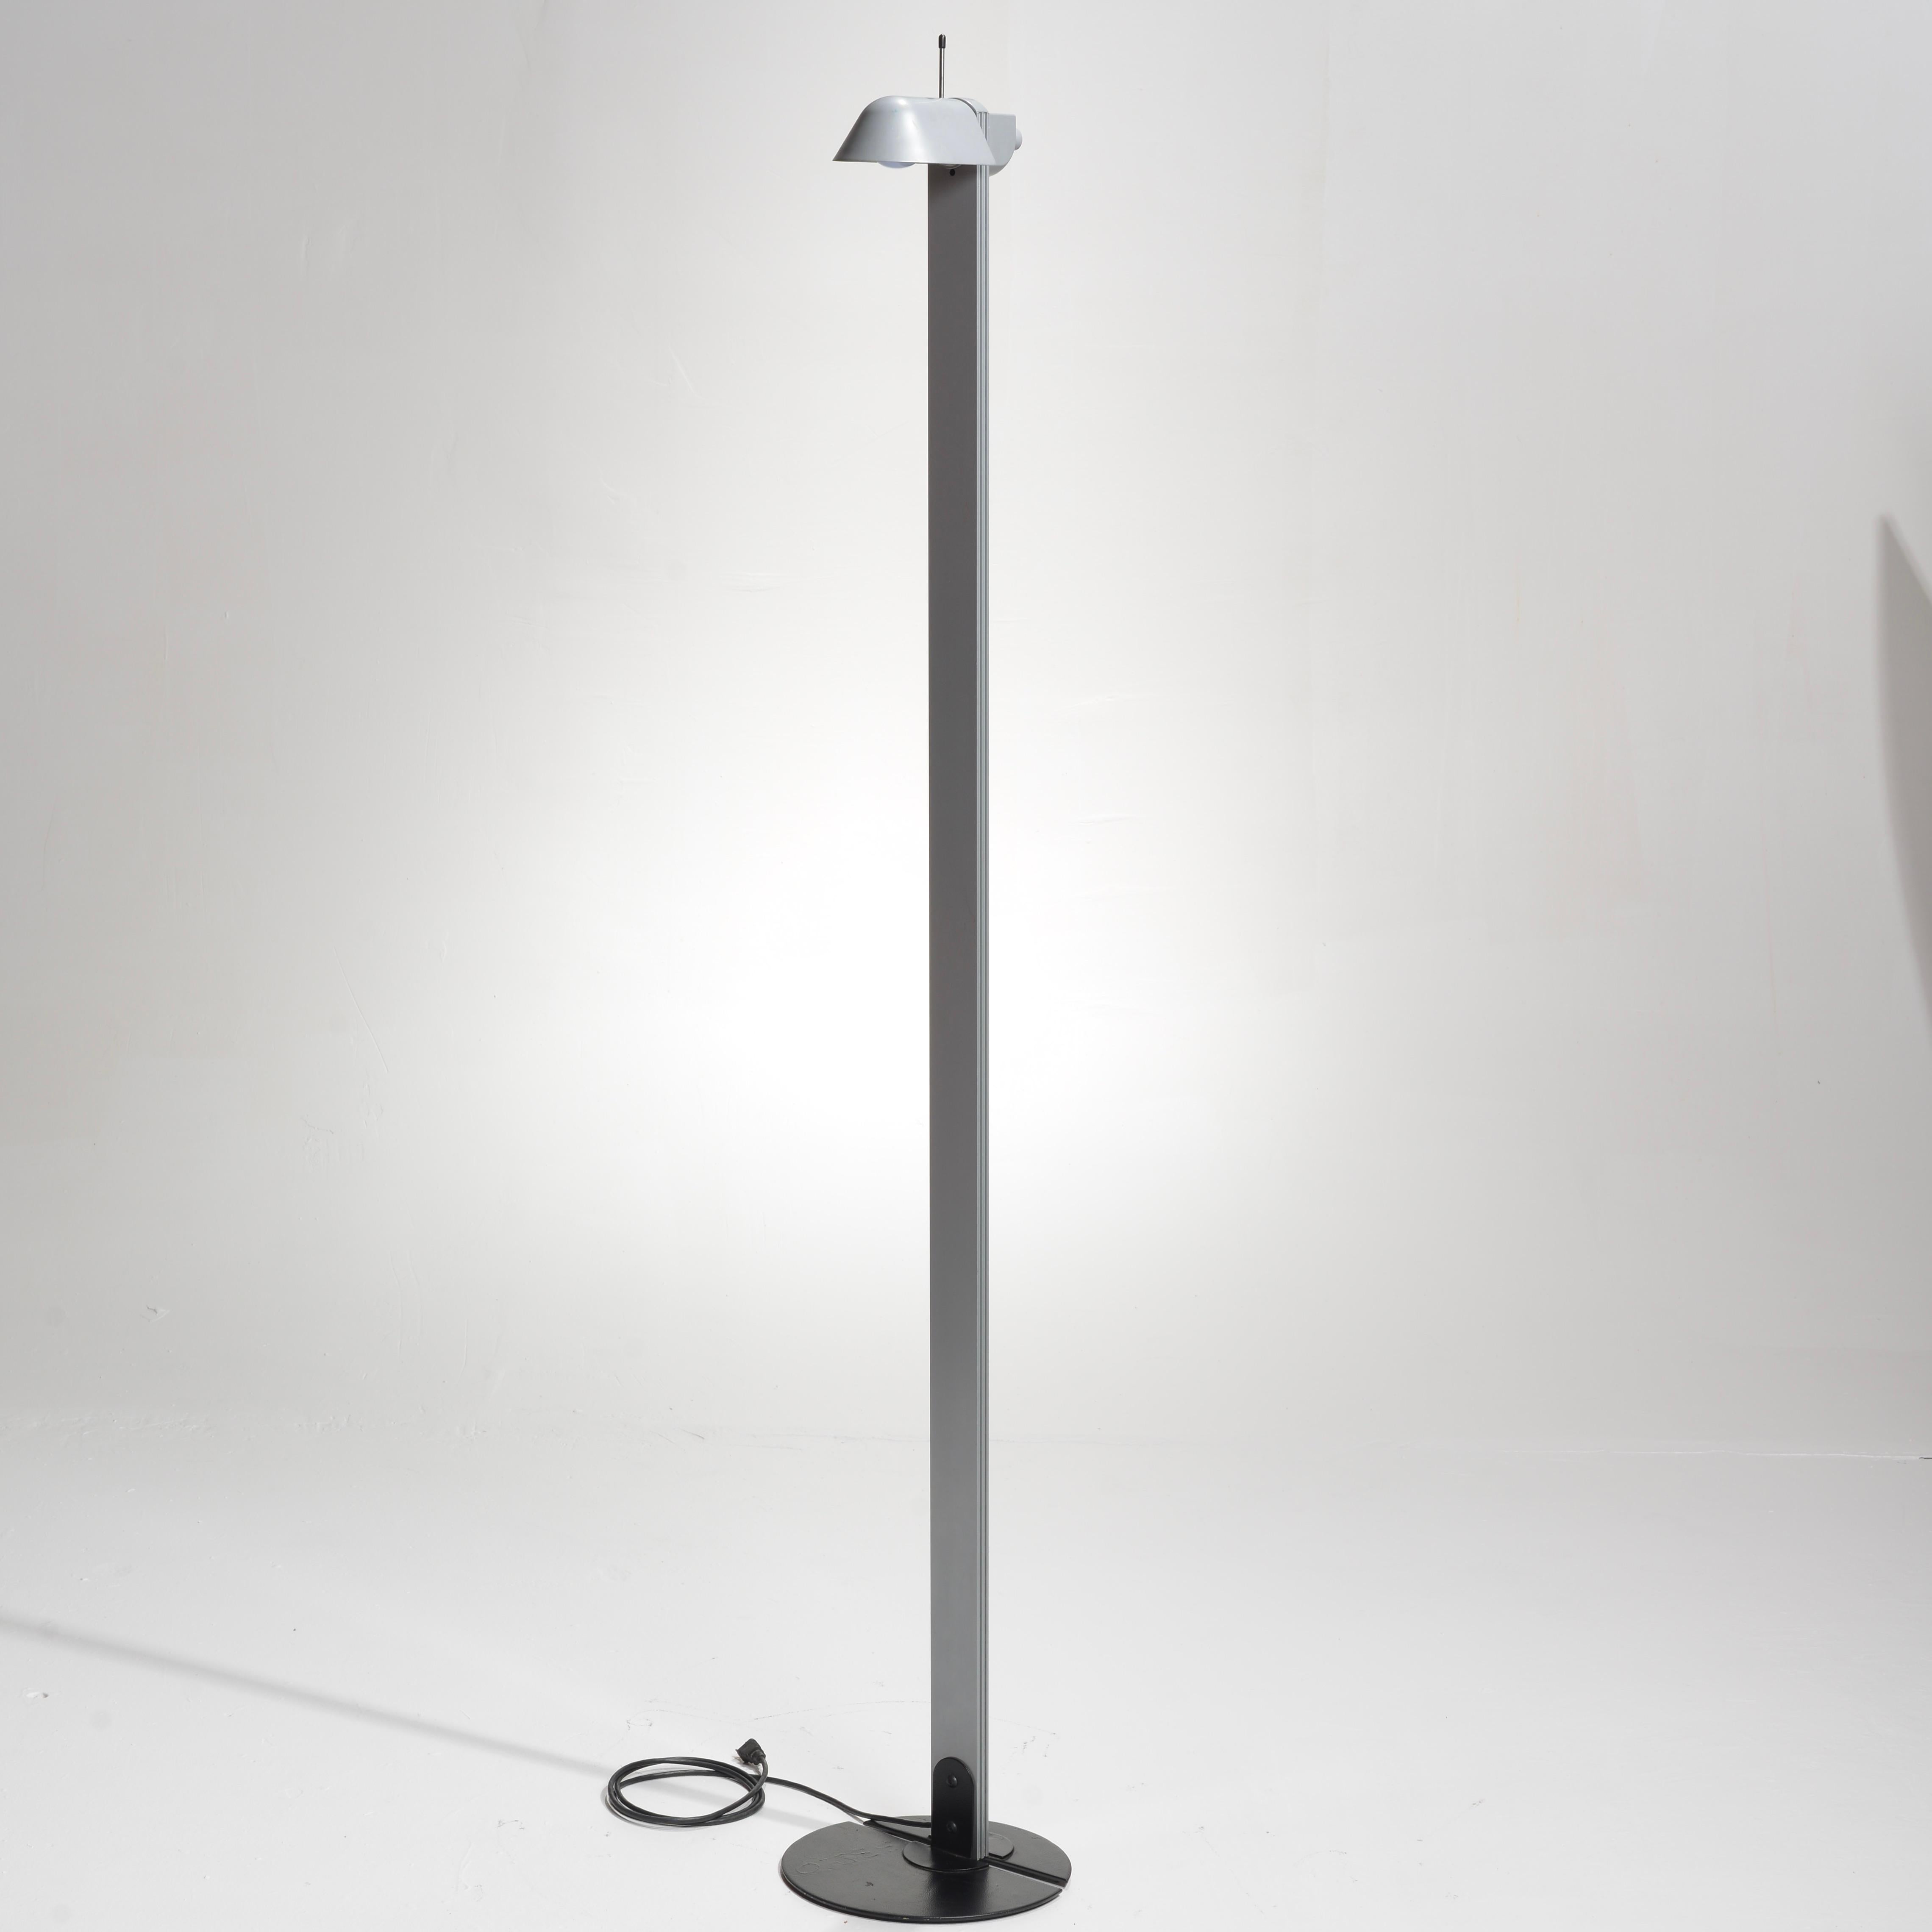 Rare Ron Rezek floor lamp with an adjustable head that swivels 360 degrees enabling it to function as a torchiere, downward facing light, or as a spotlight. It has a dimmer switch on the top for low or bright light. It has a round base with space